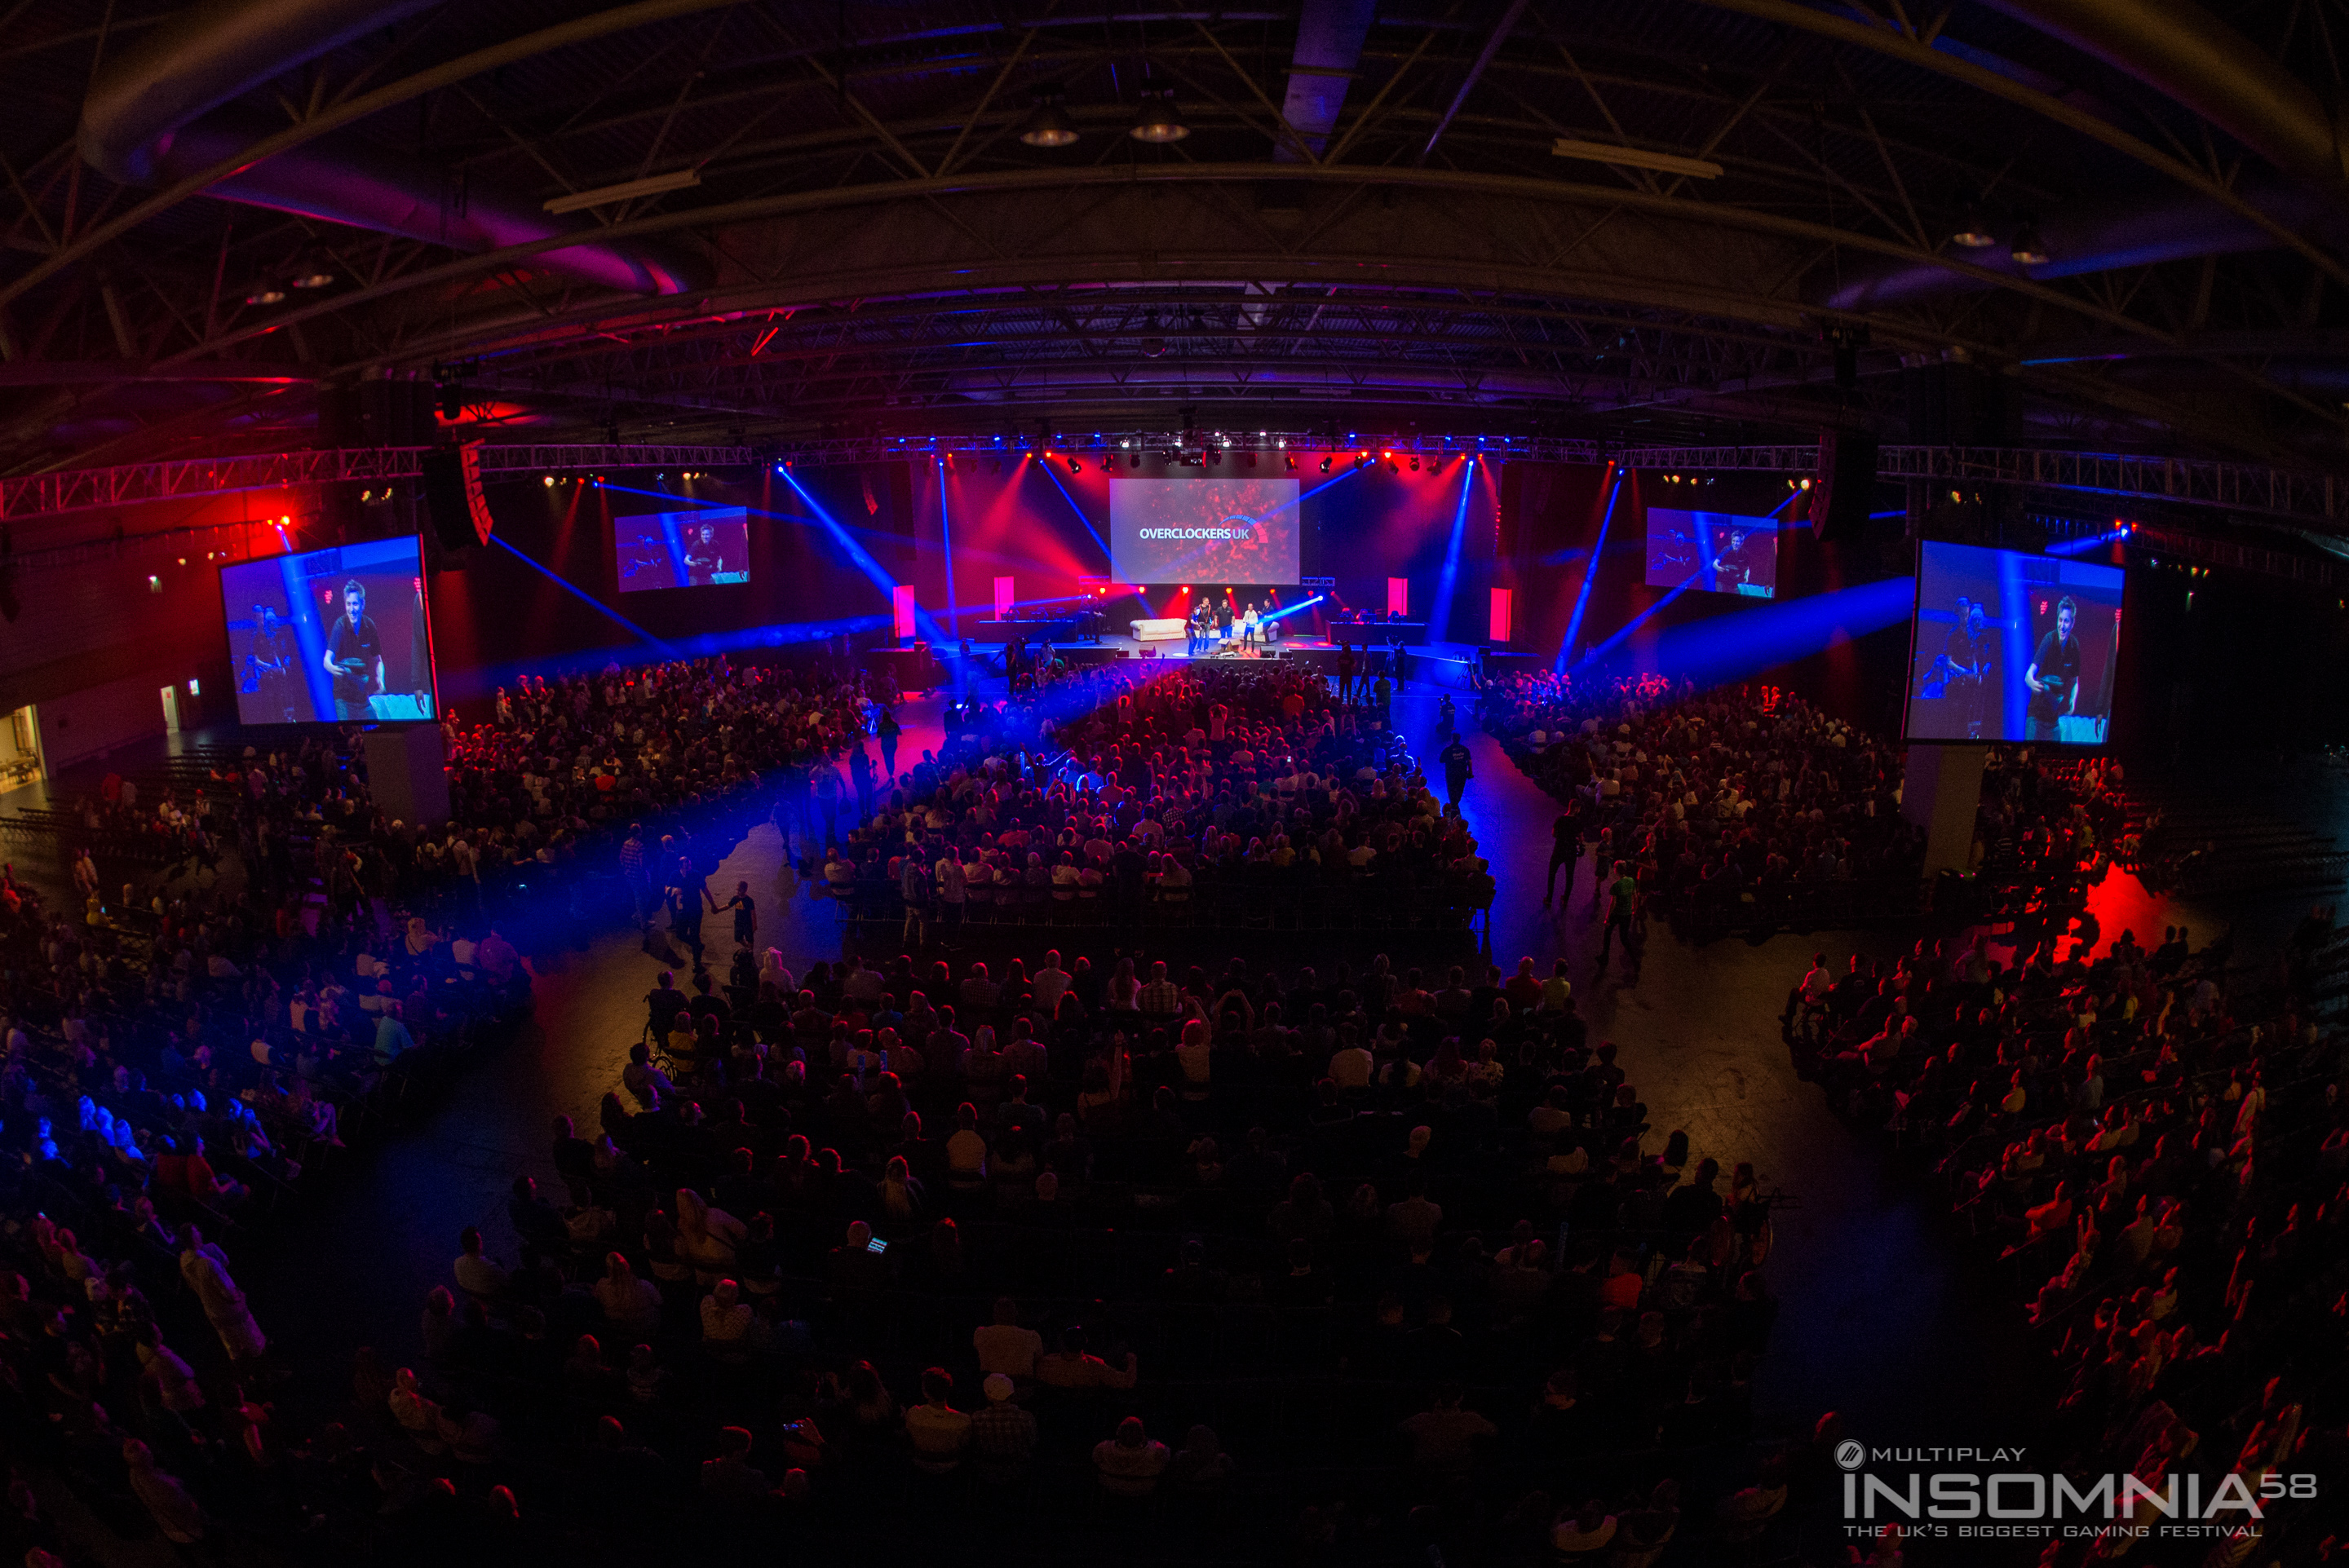 Avolites powers lighting and video at UK’s biggest ever gaming event